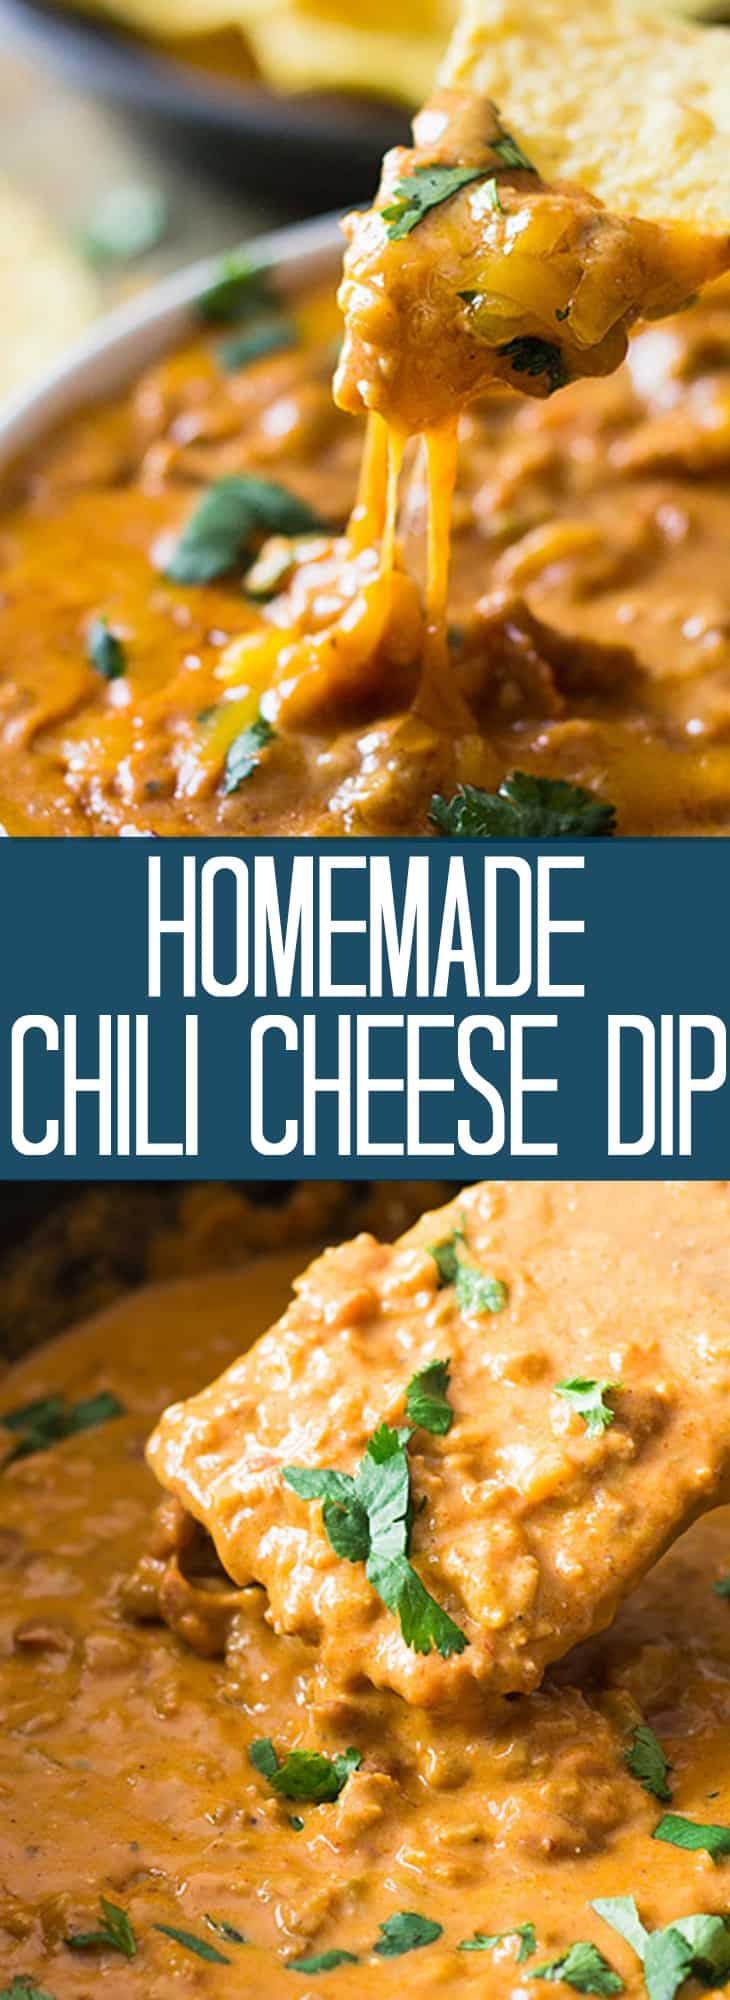 This Homemade Chili Cheese Dip contains no processed cheese and no canned chili, just simple homemade goodness right in the slow cooker!! | www.countrysidecravings.com